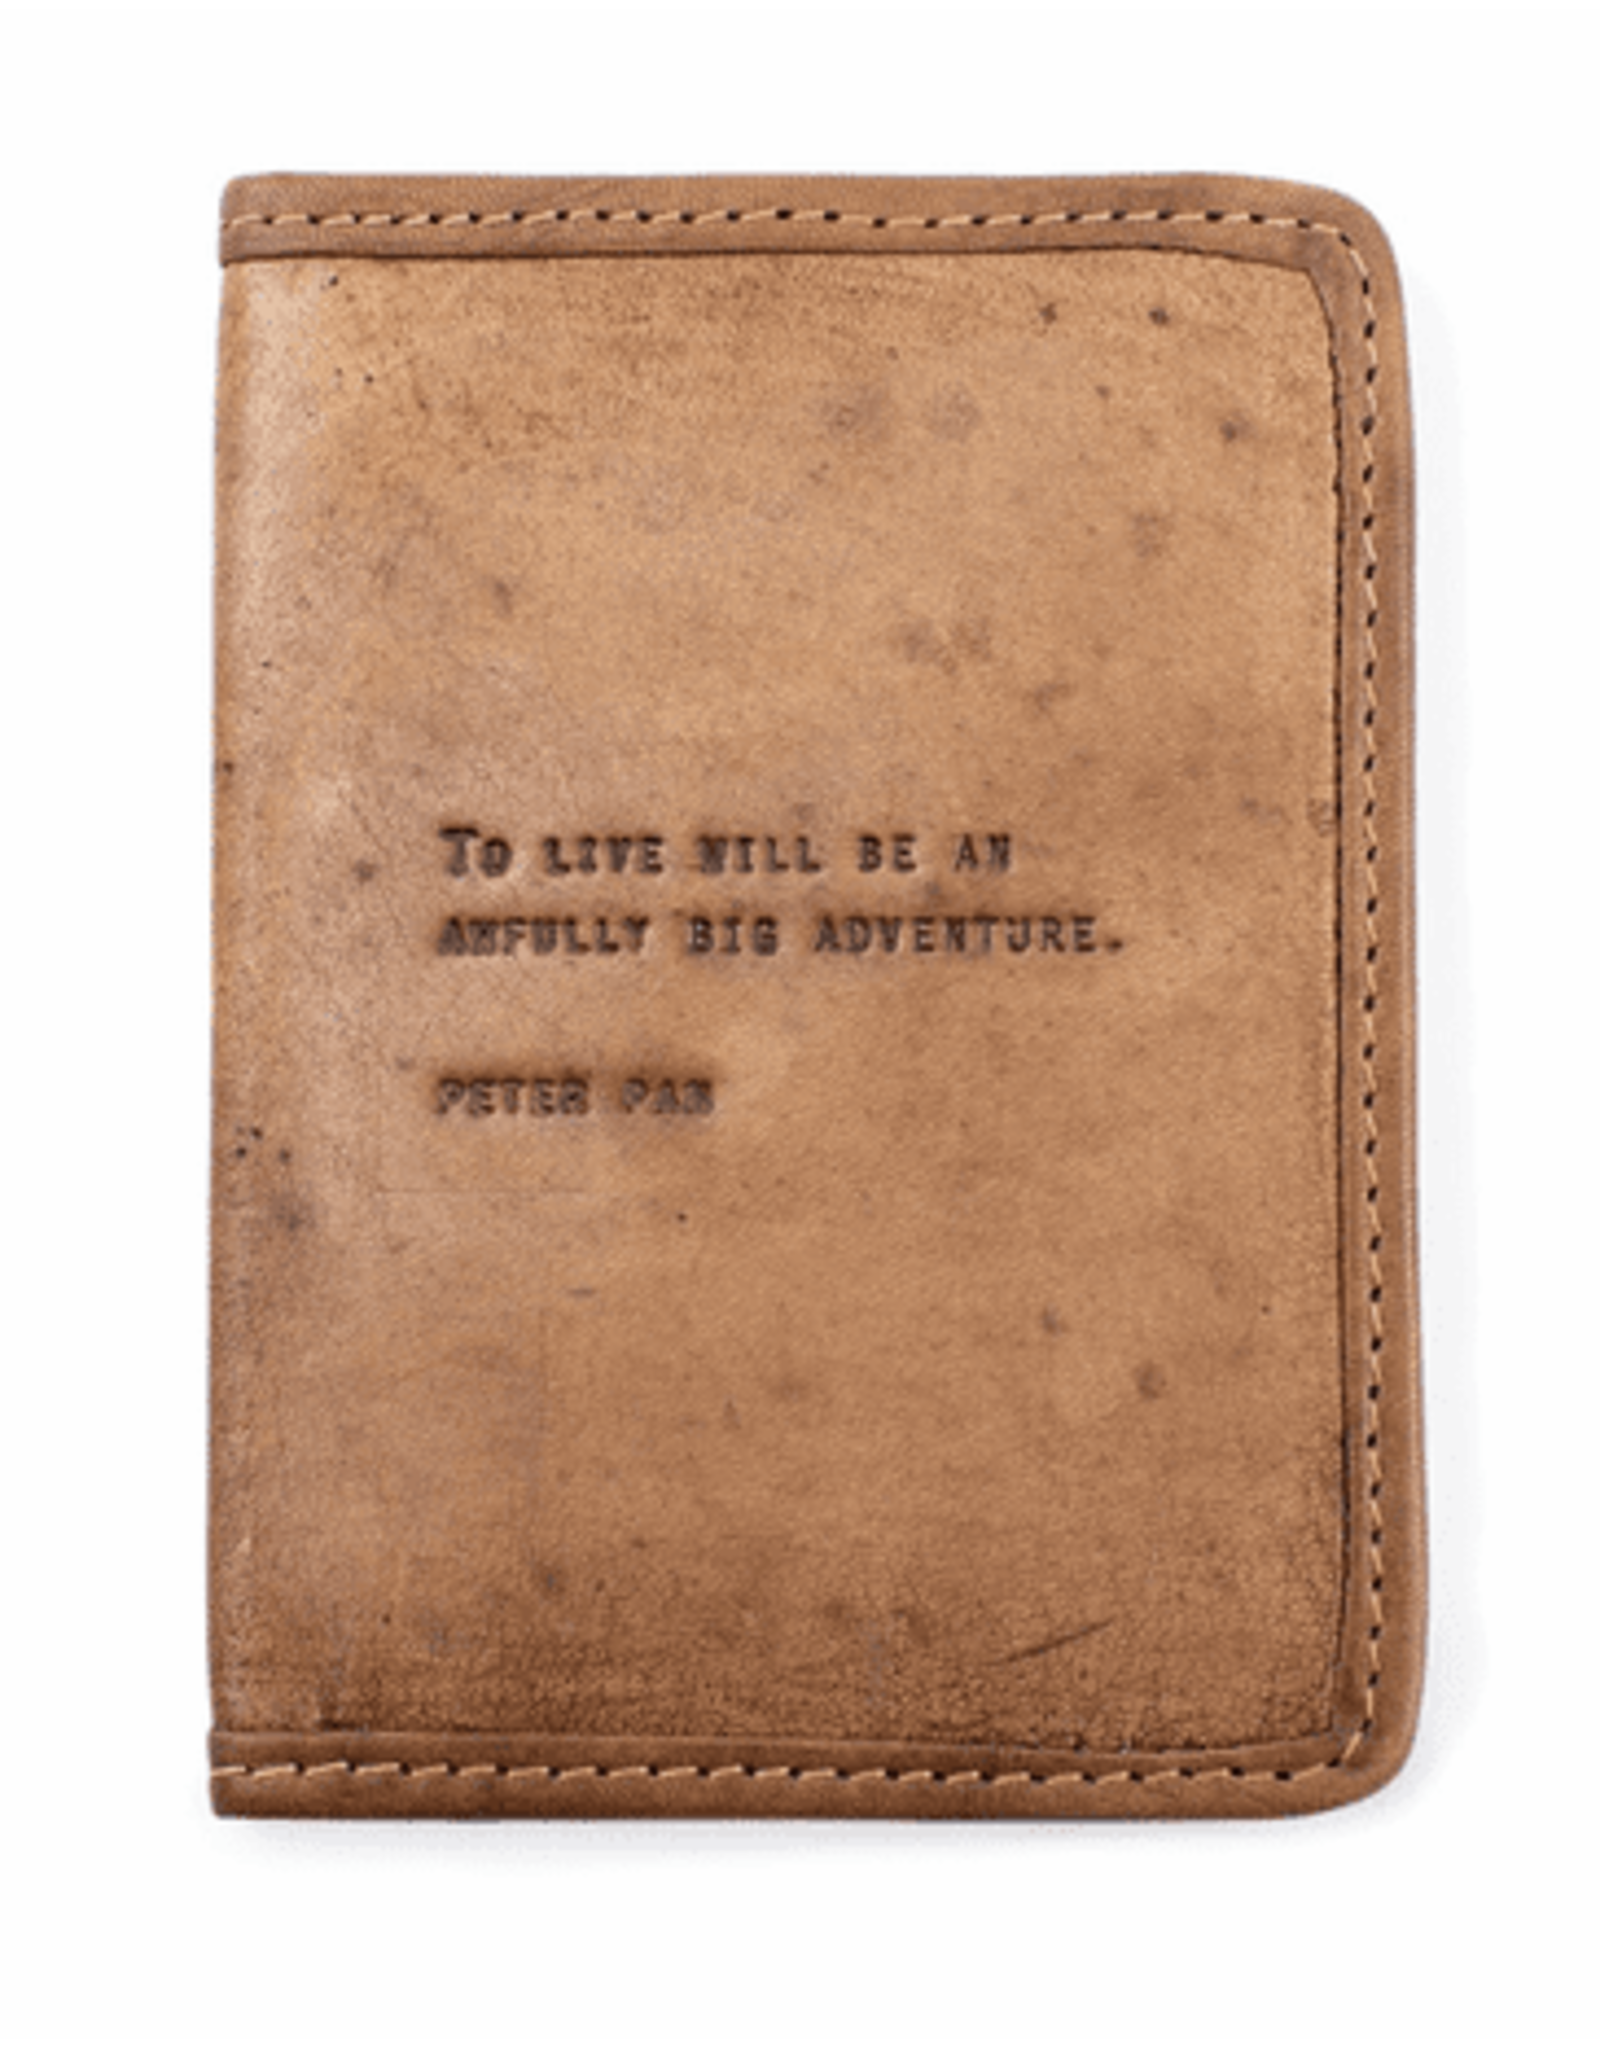 Sugarboo & Co Leather Passport Cover, Peter Pan